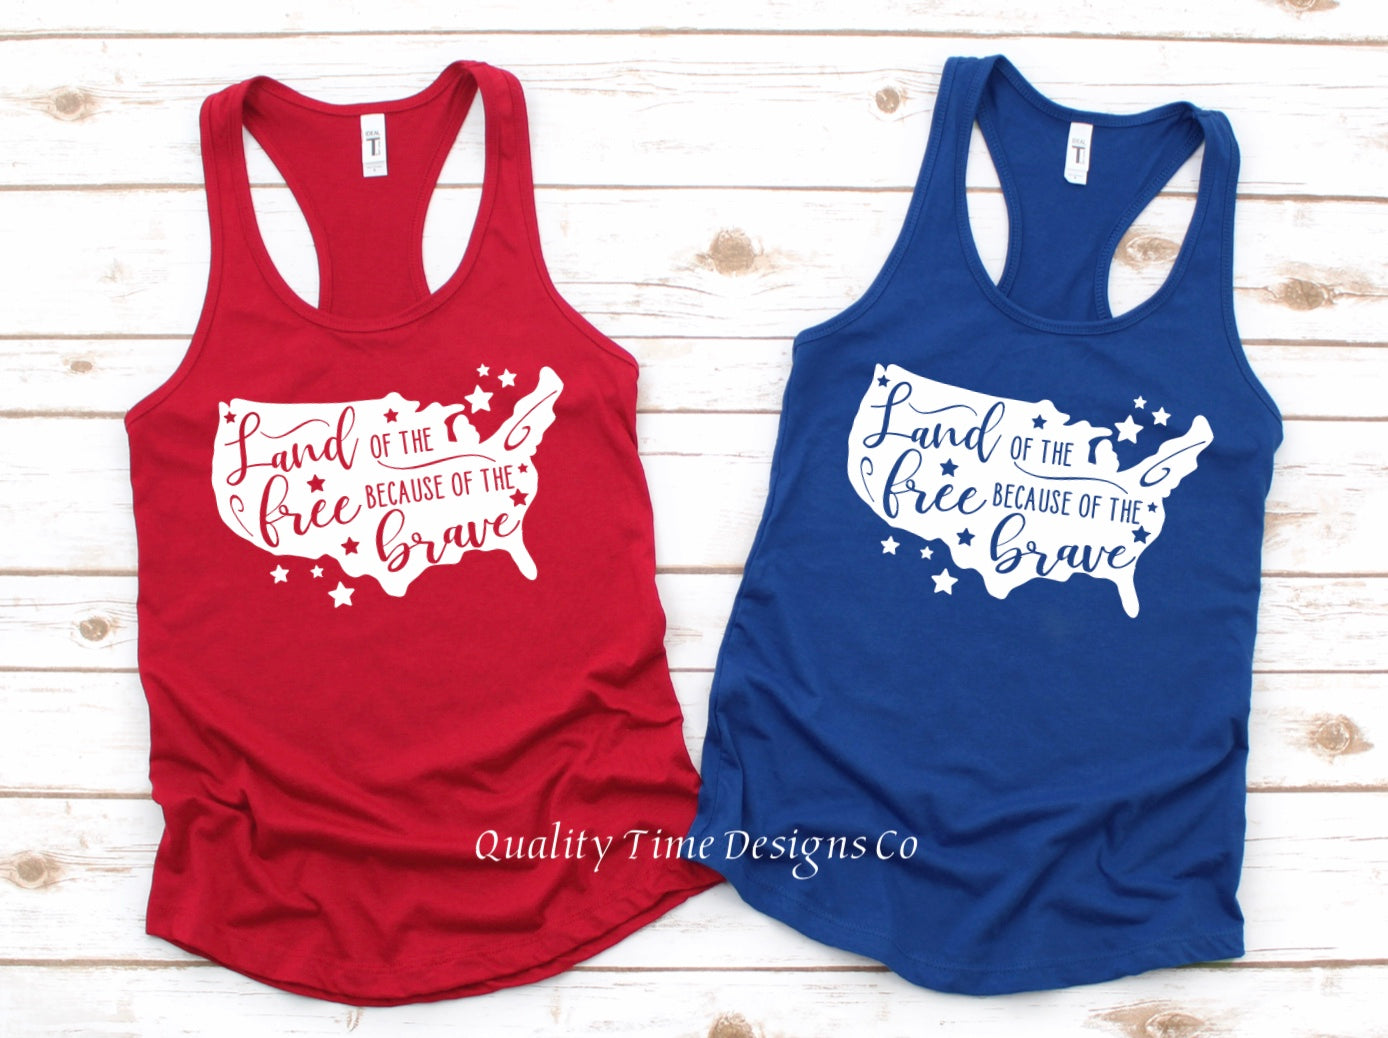 Land of the free because of the Brave tank top